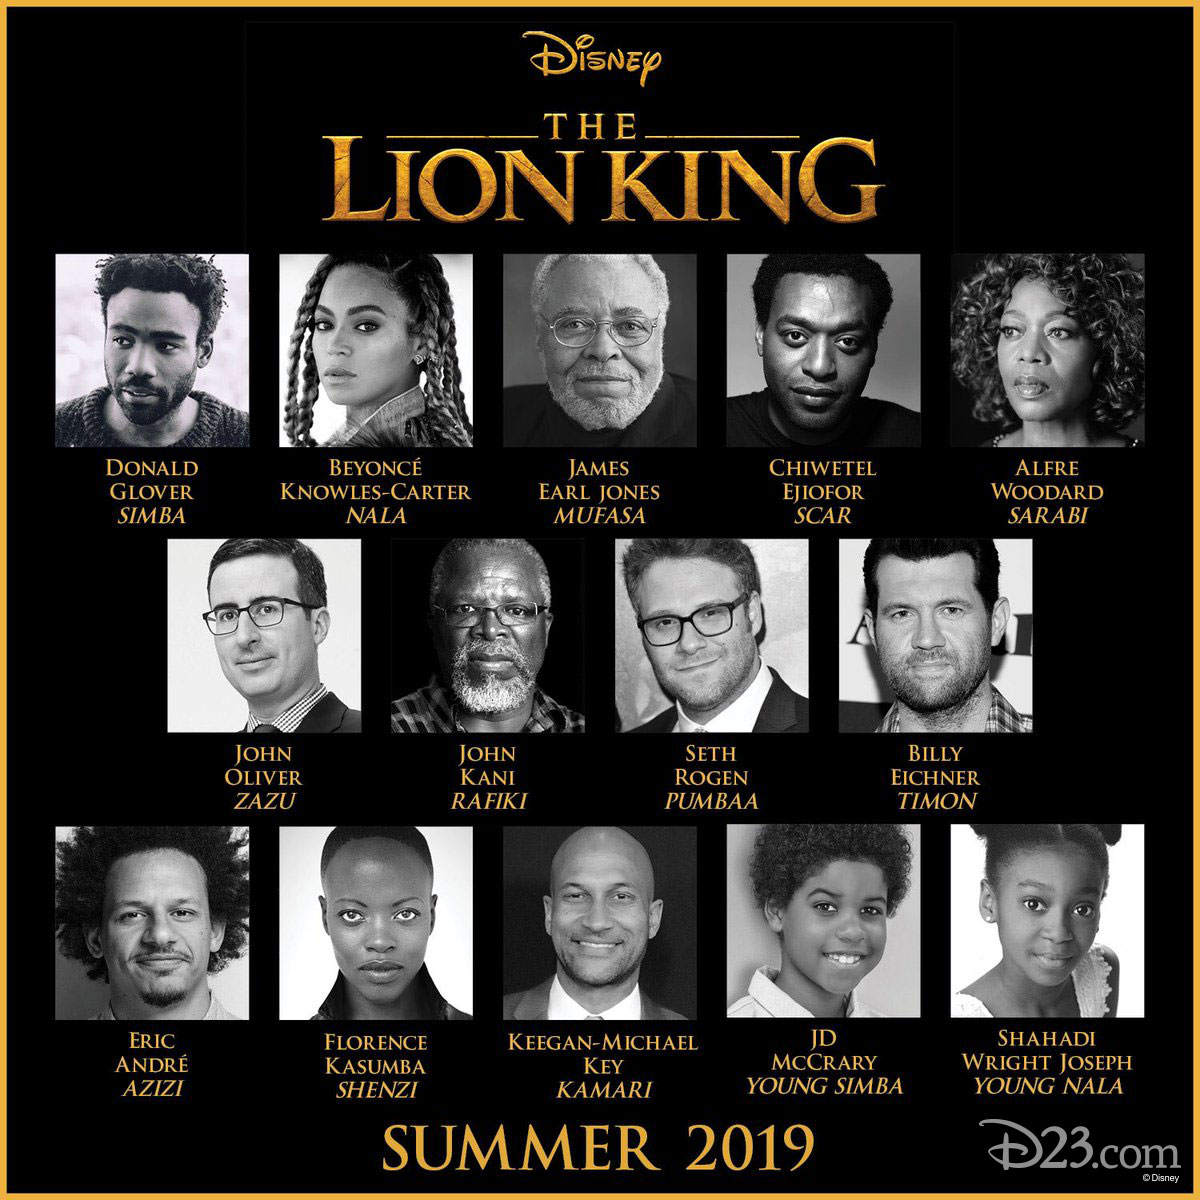 leven Scully plank Cast of The Lion King Revealed - D23